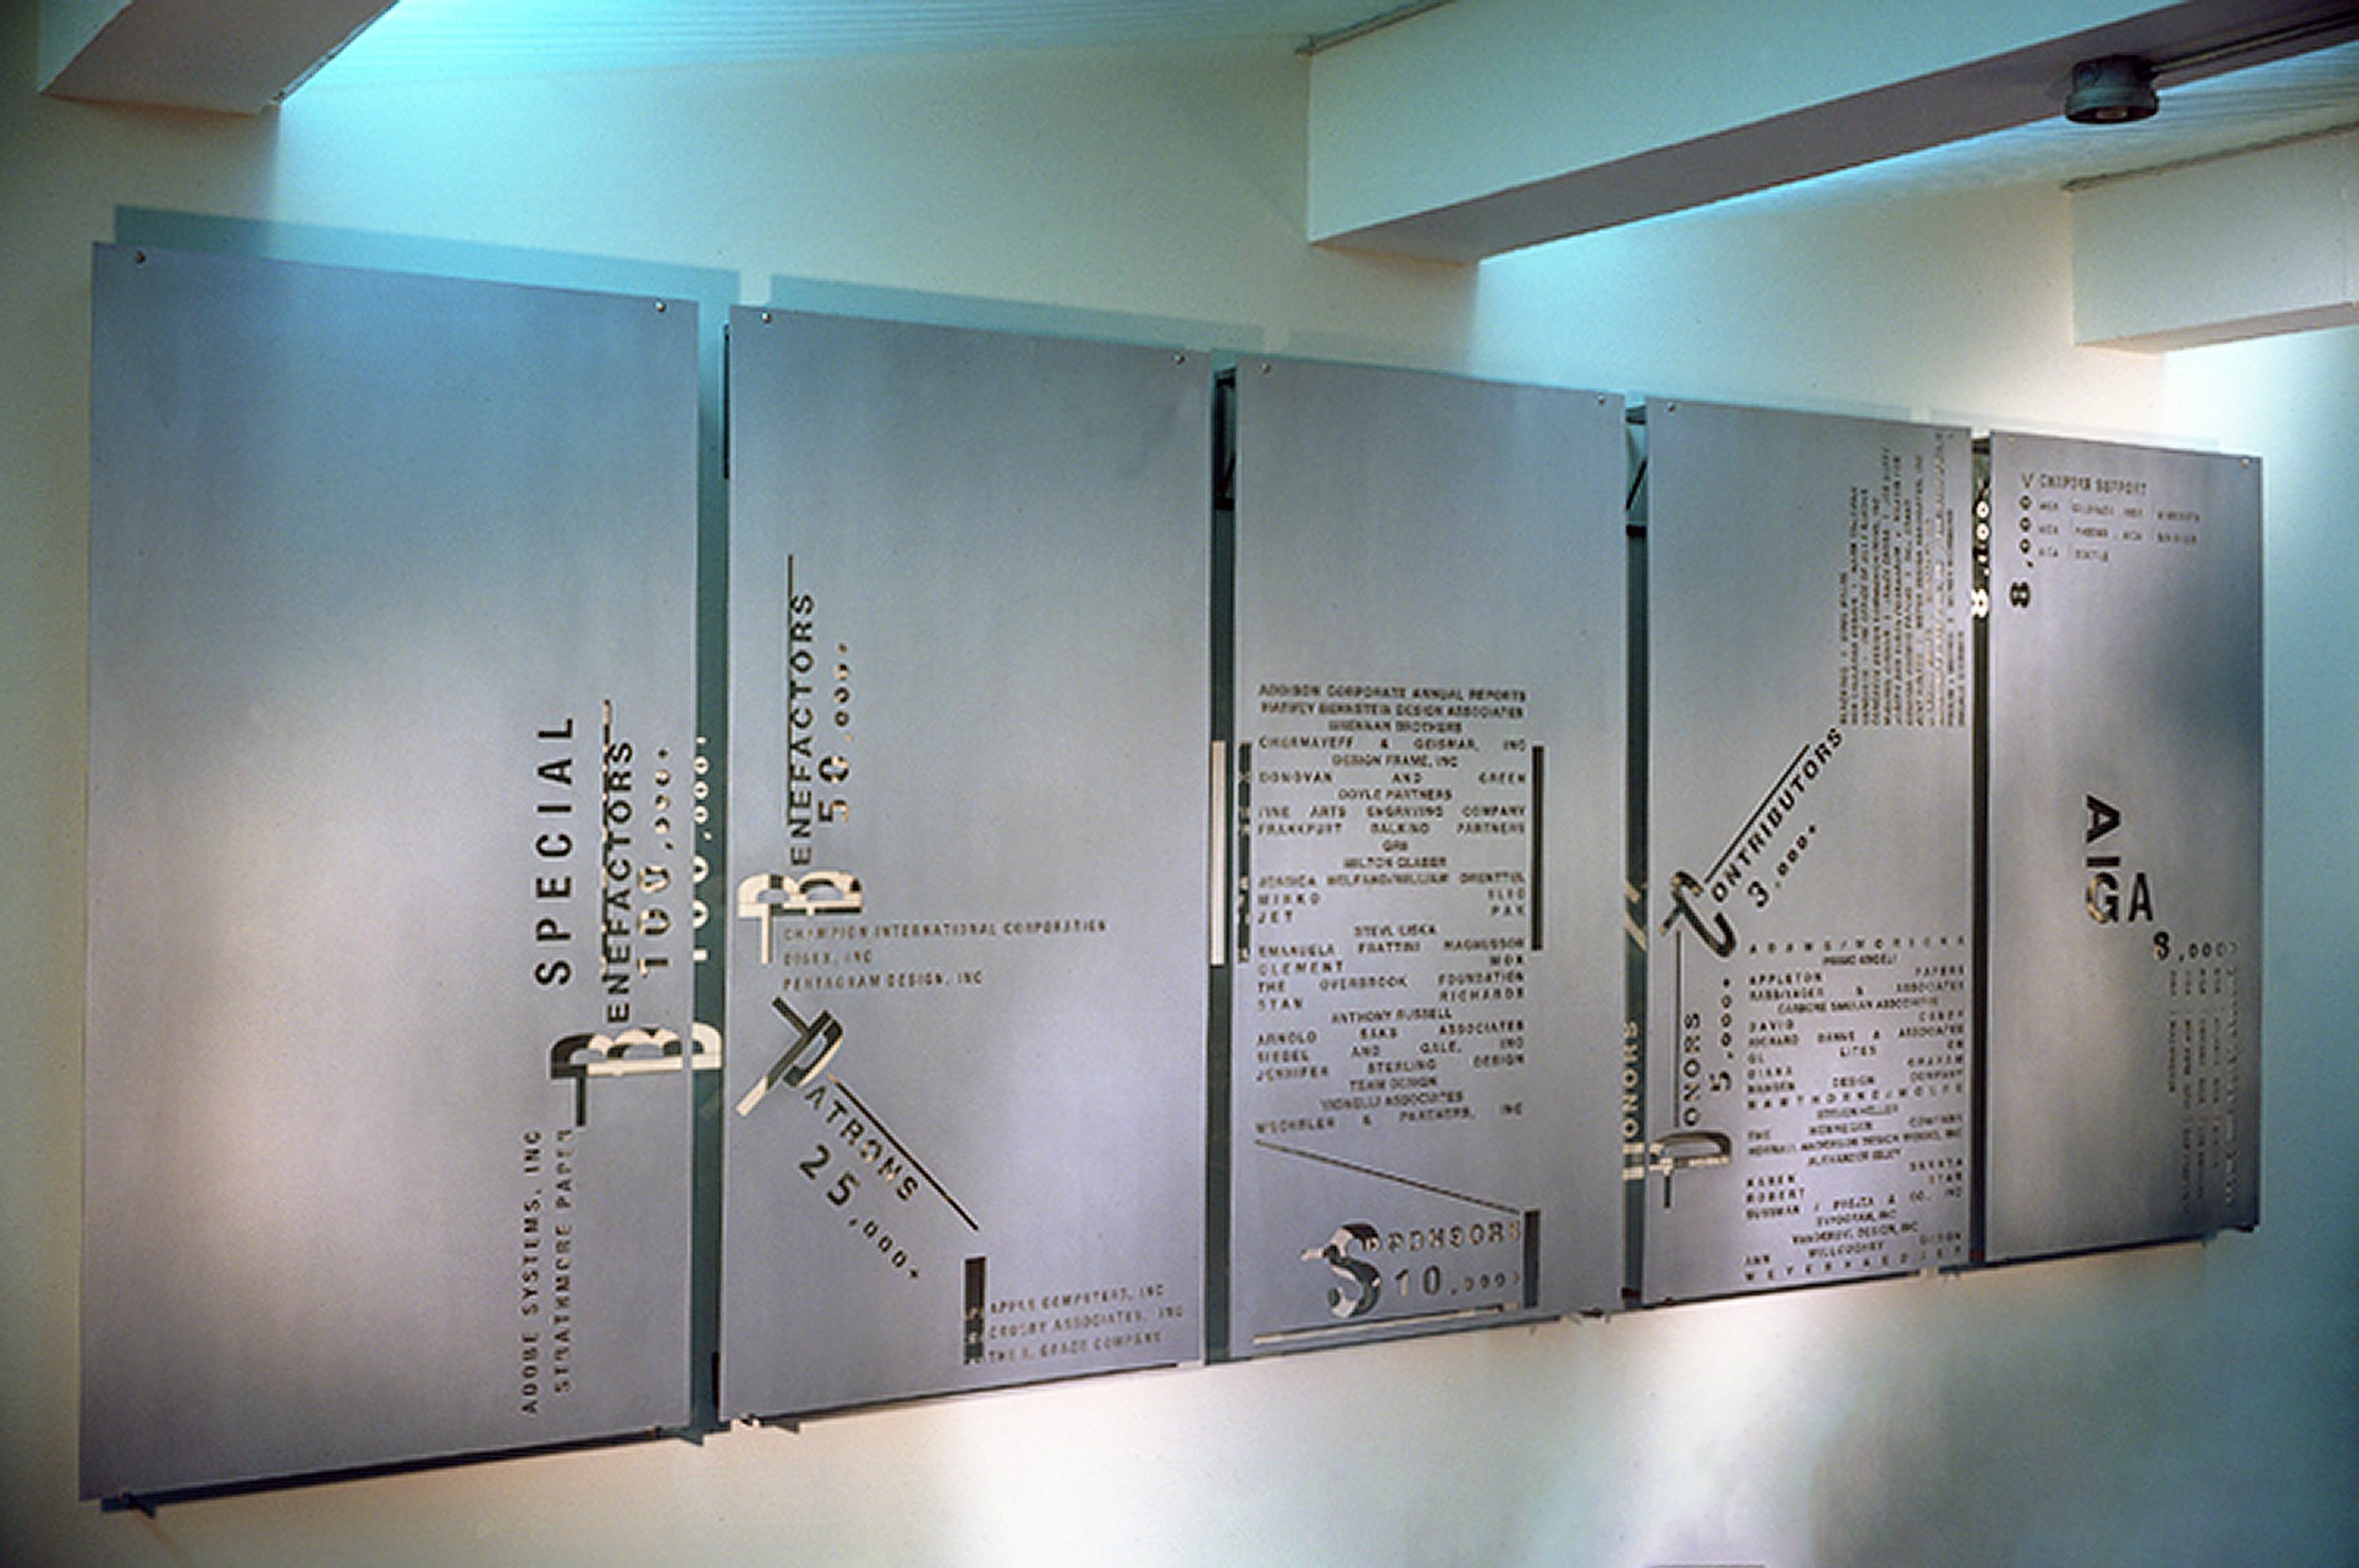 AIGA (American Institute of Graphic arts) Donor Wall. | NYC Corporate Offices | 25' floating stainless steel laser cut